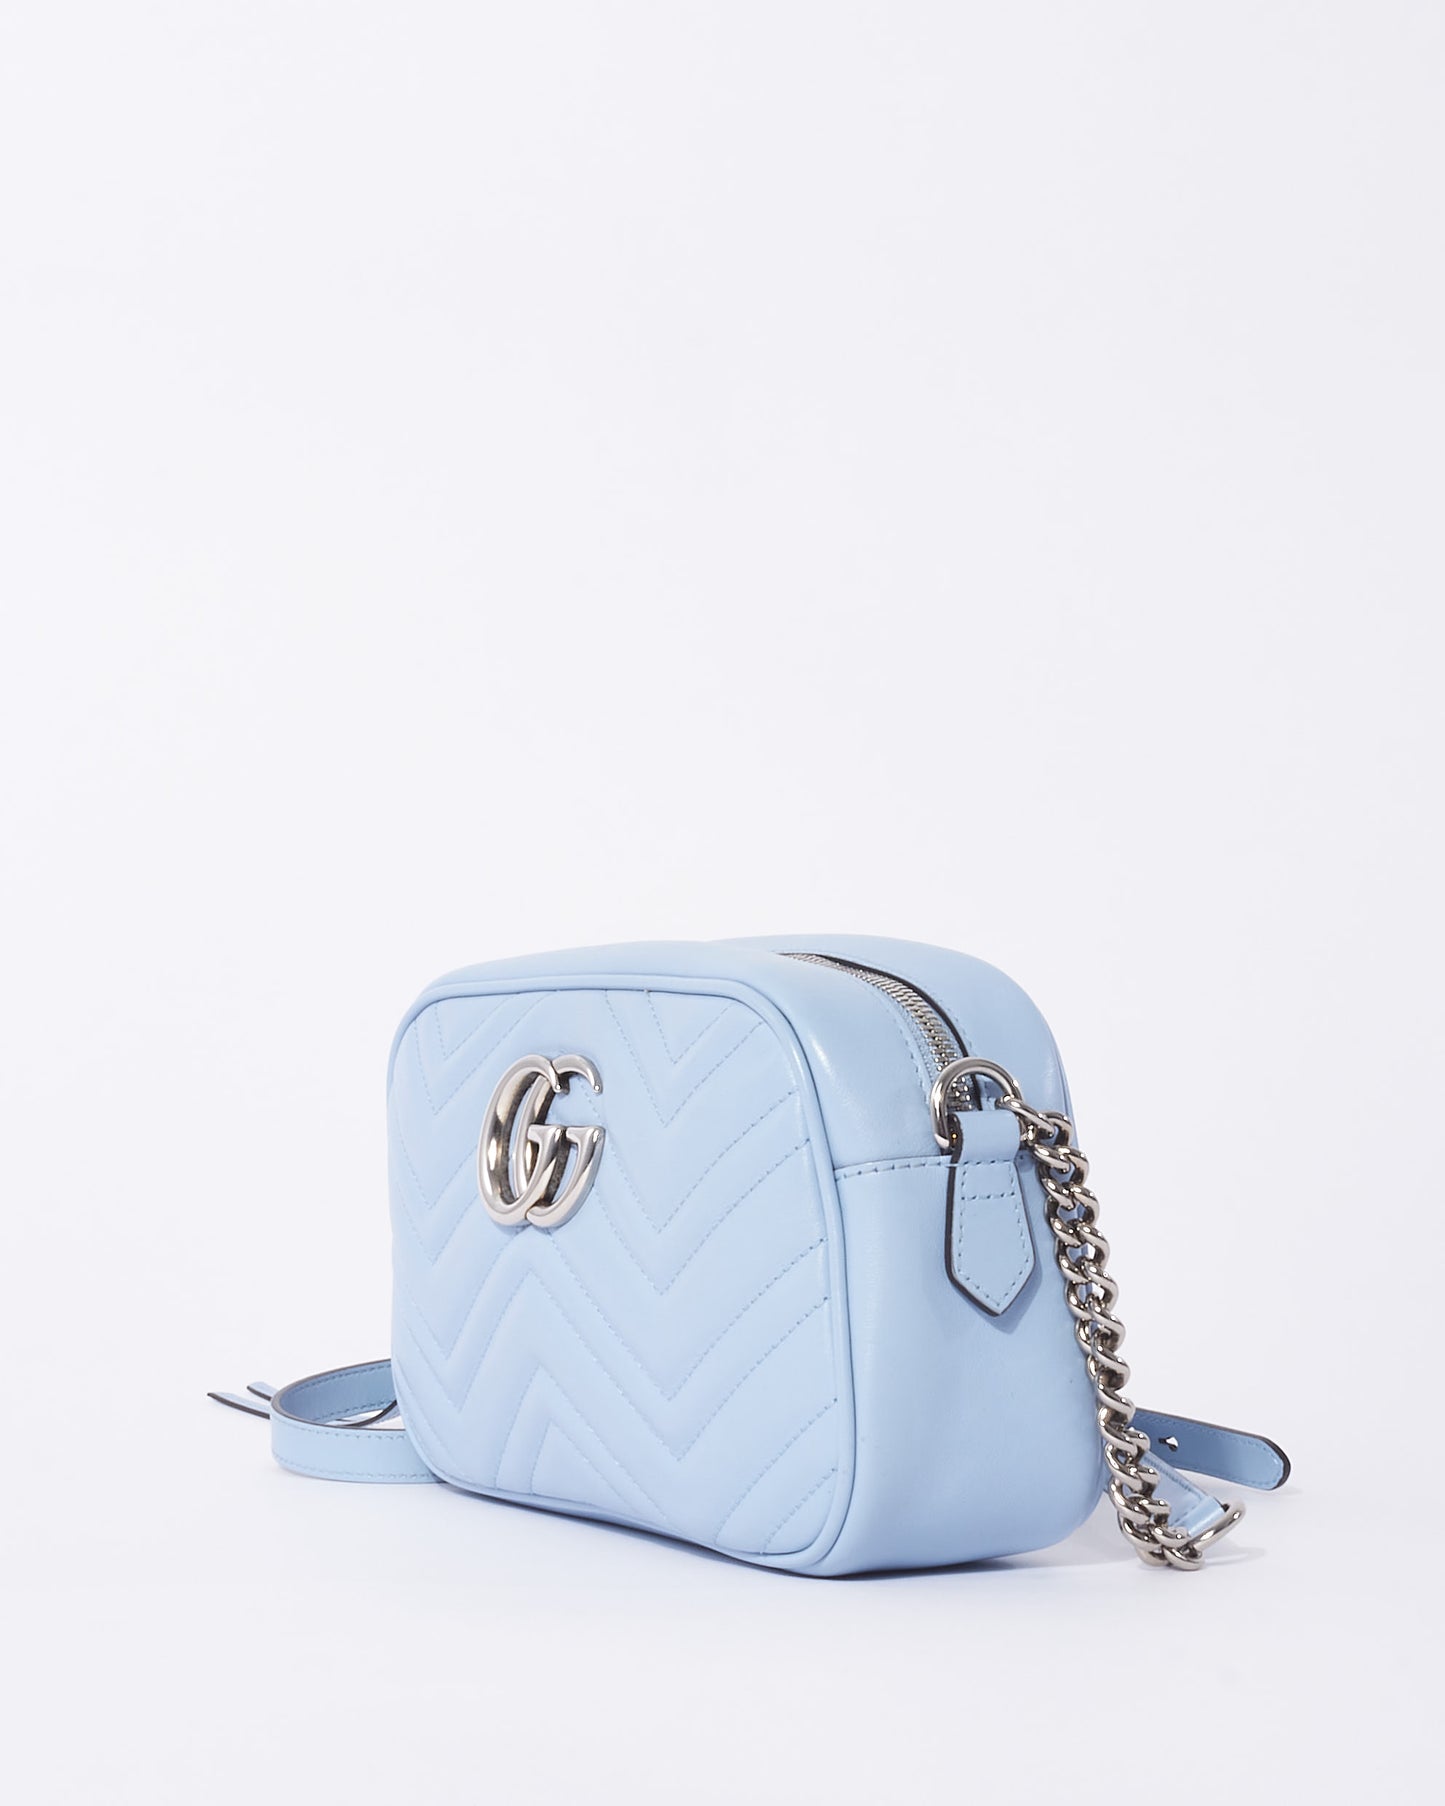 Gucci Light Blue Leather SHW Marmont Small Camera Bag